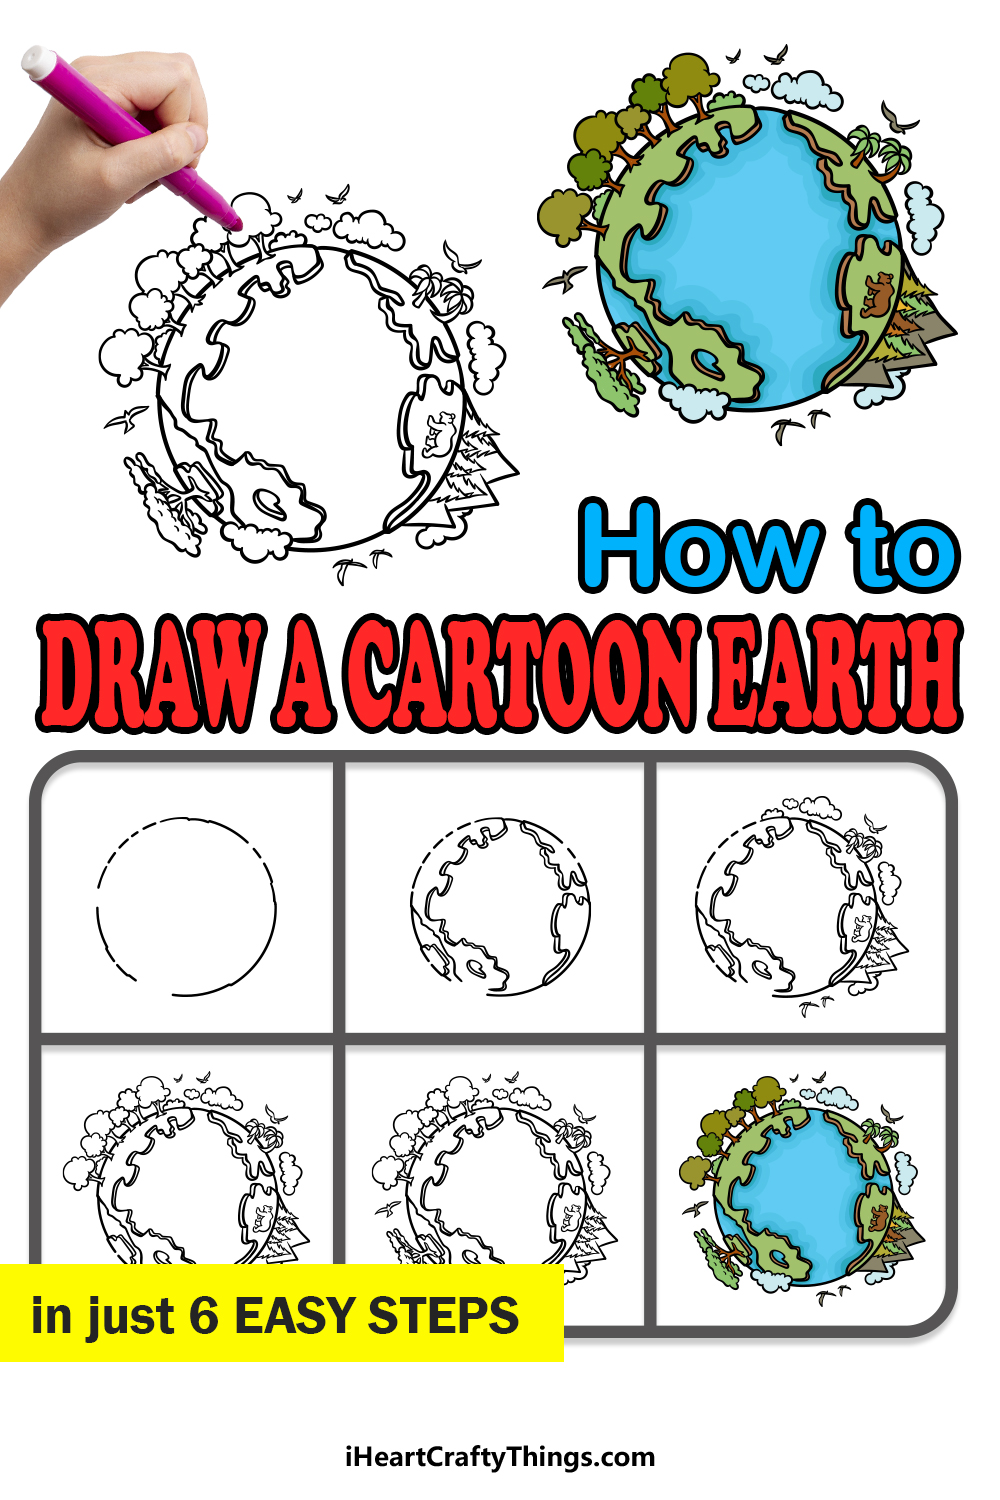 how to draw a cartoon earth in 6 easy steps